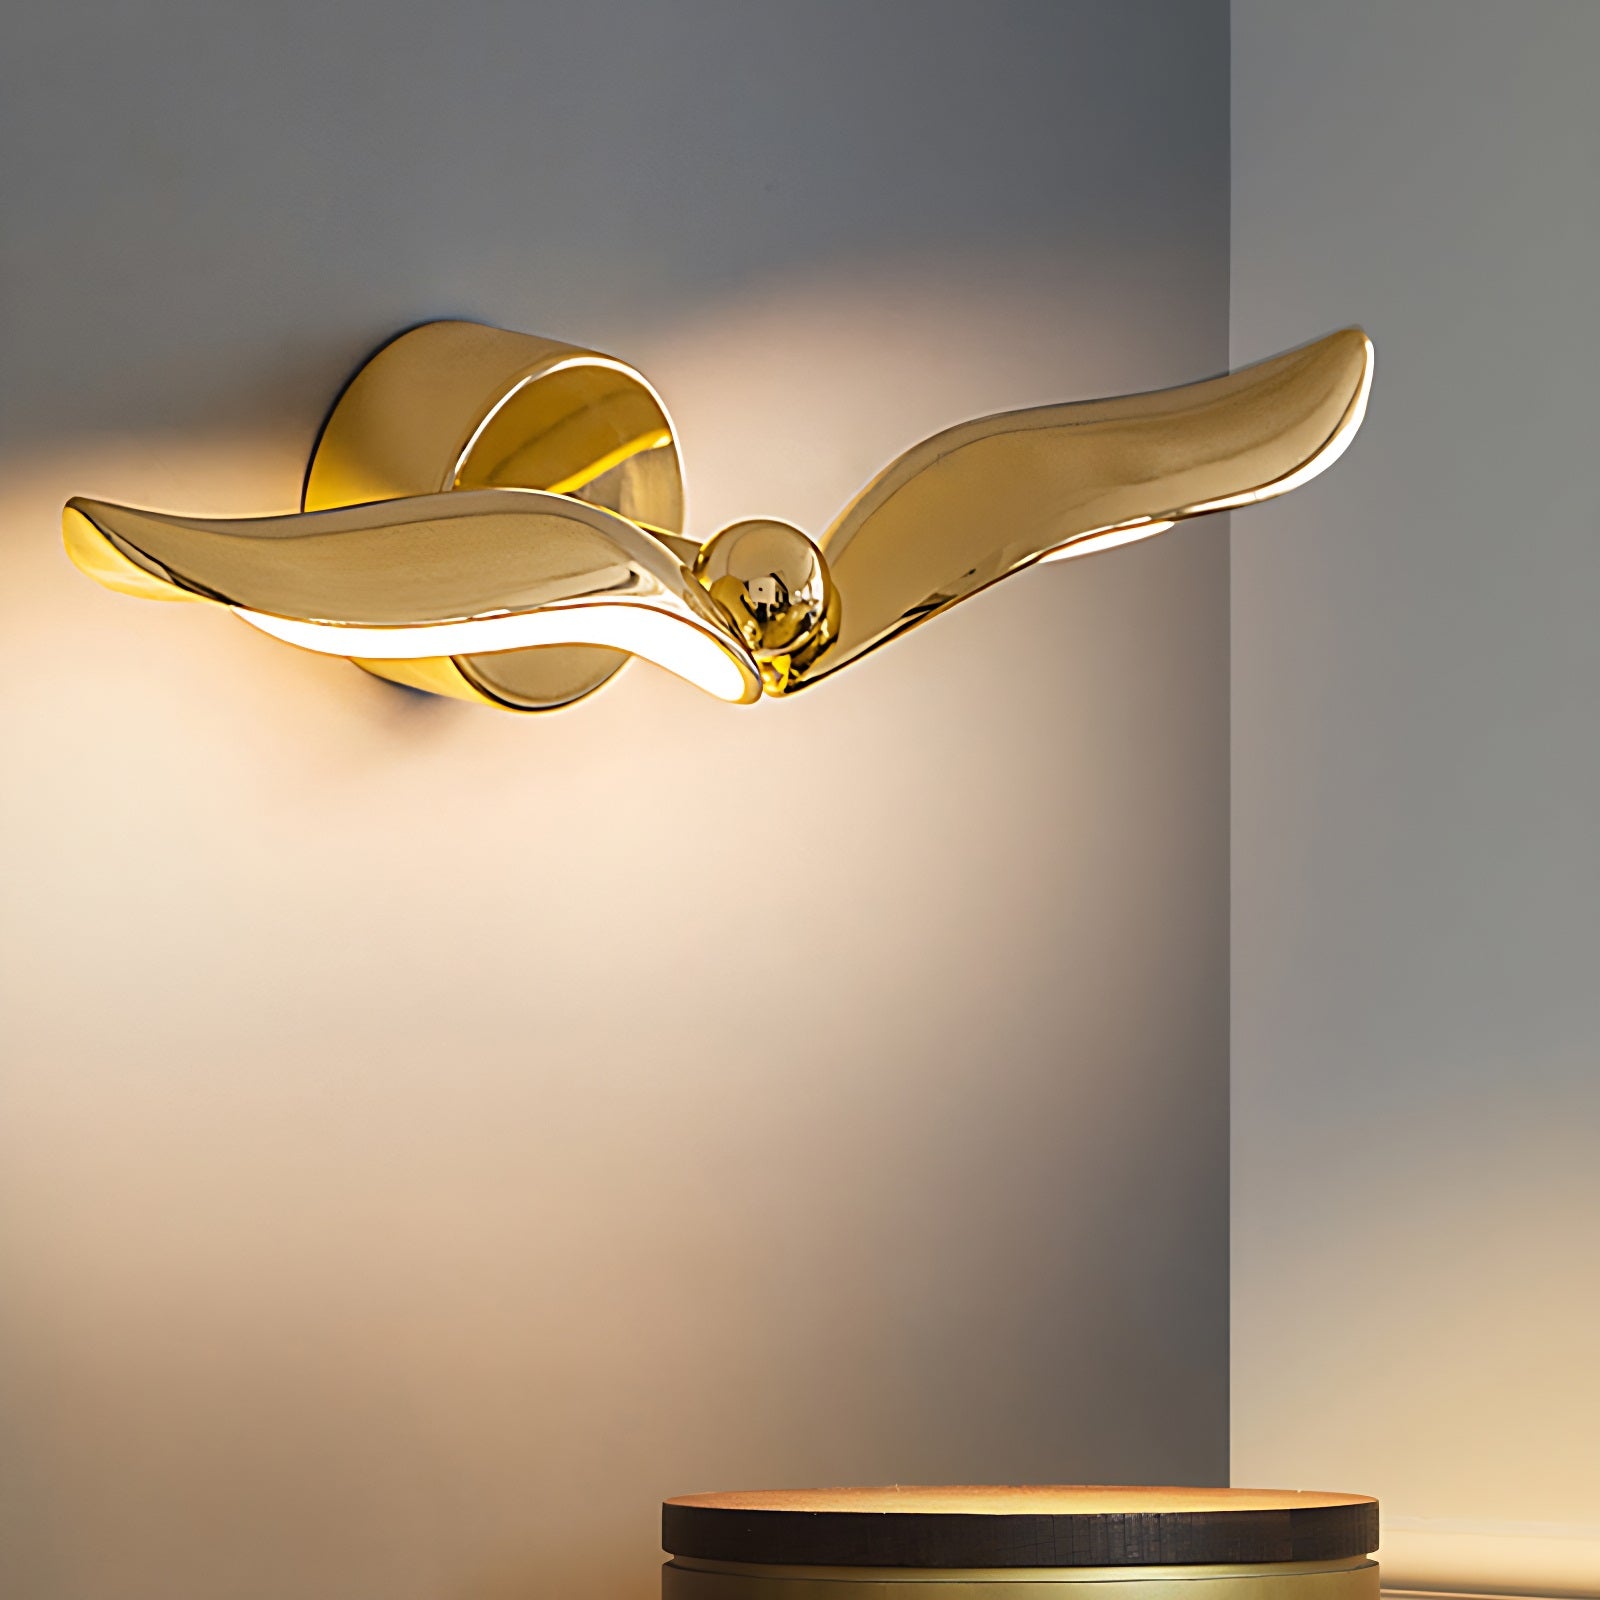 A modern design wall light in the shape of a gold wing of a bird, perfect for adding an artistic touch to any interior.